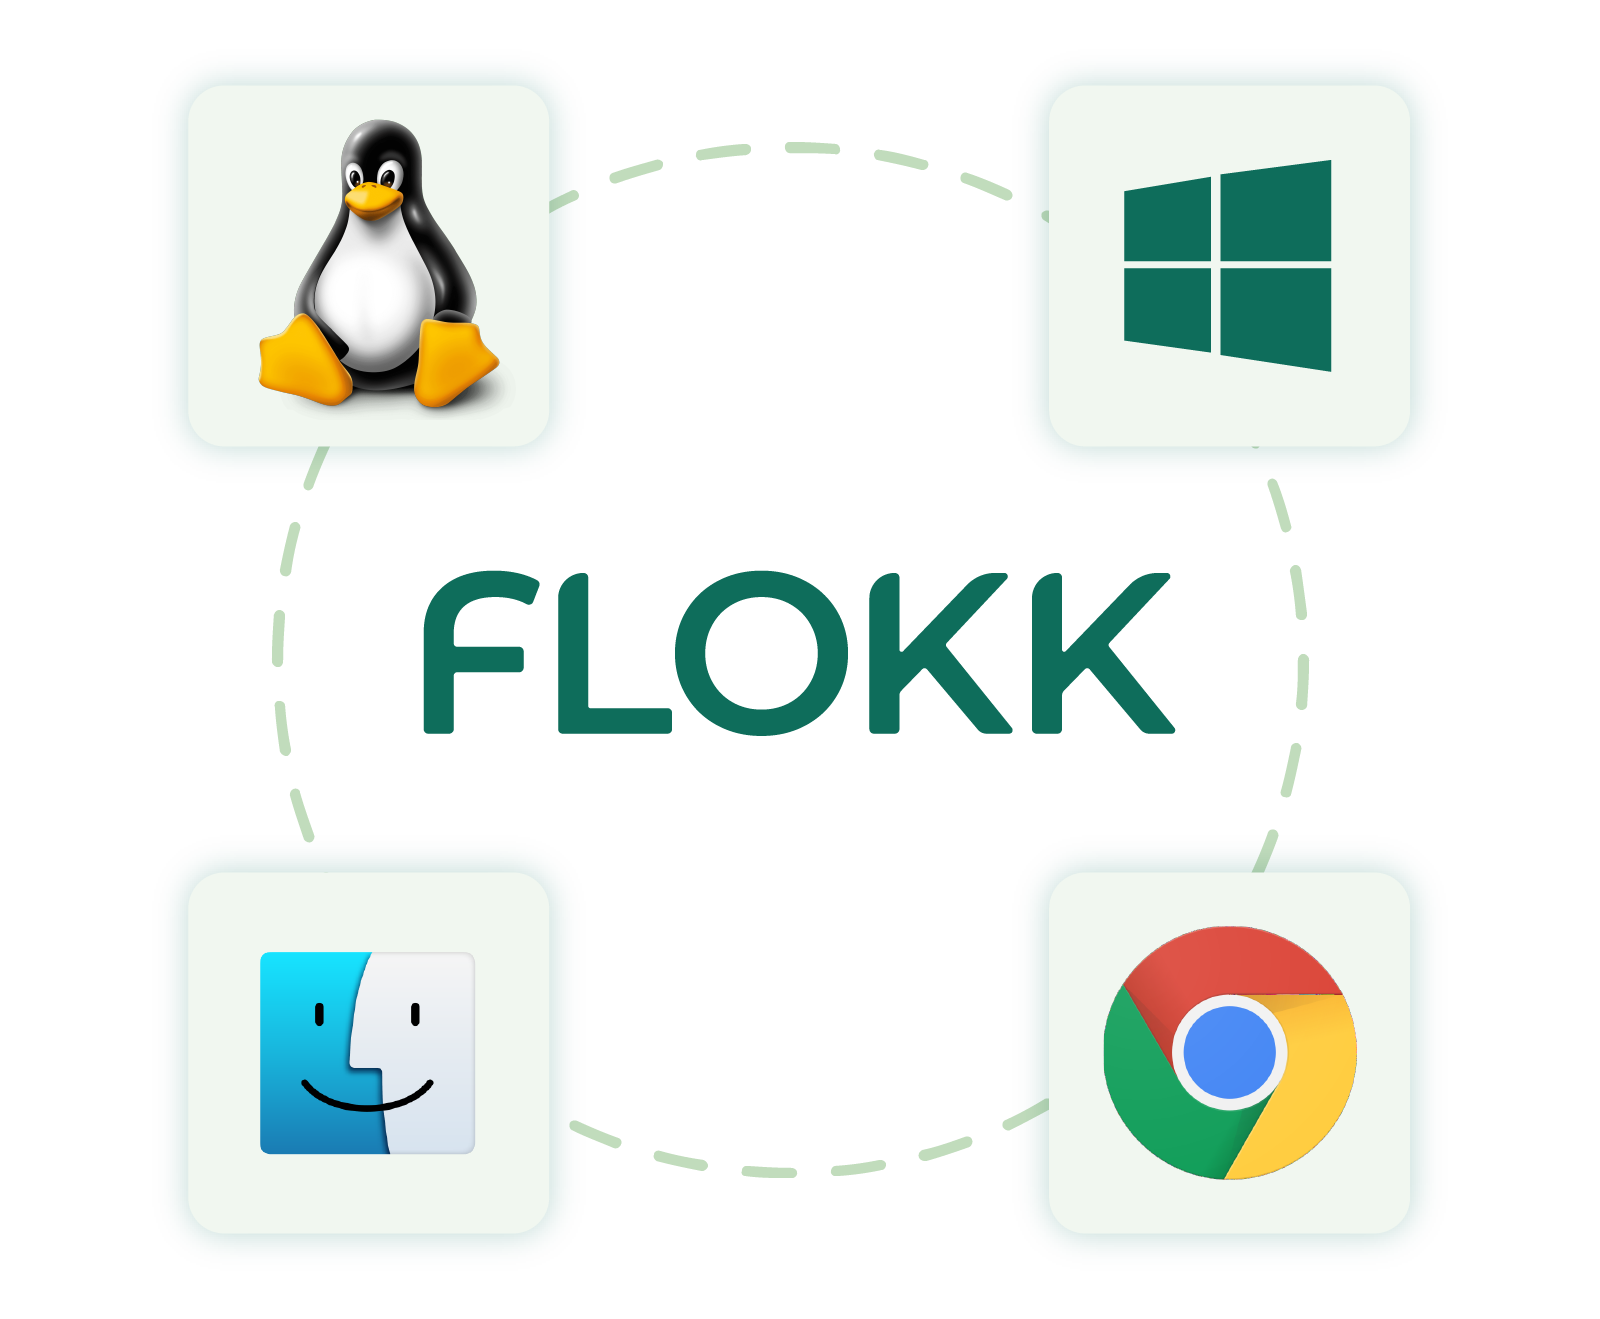 flokk ecosystem: Linux, Windows, MacOS, and the browser